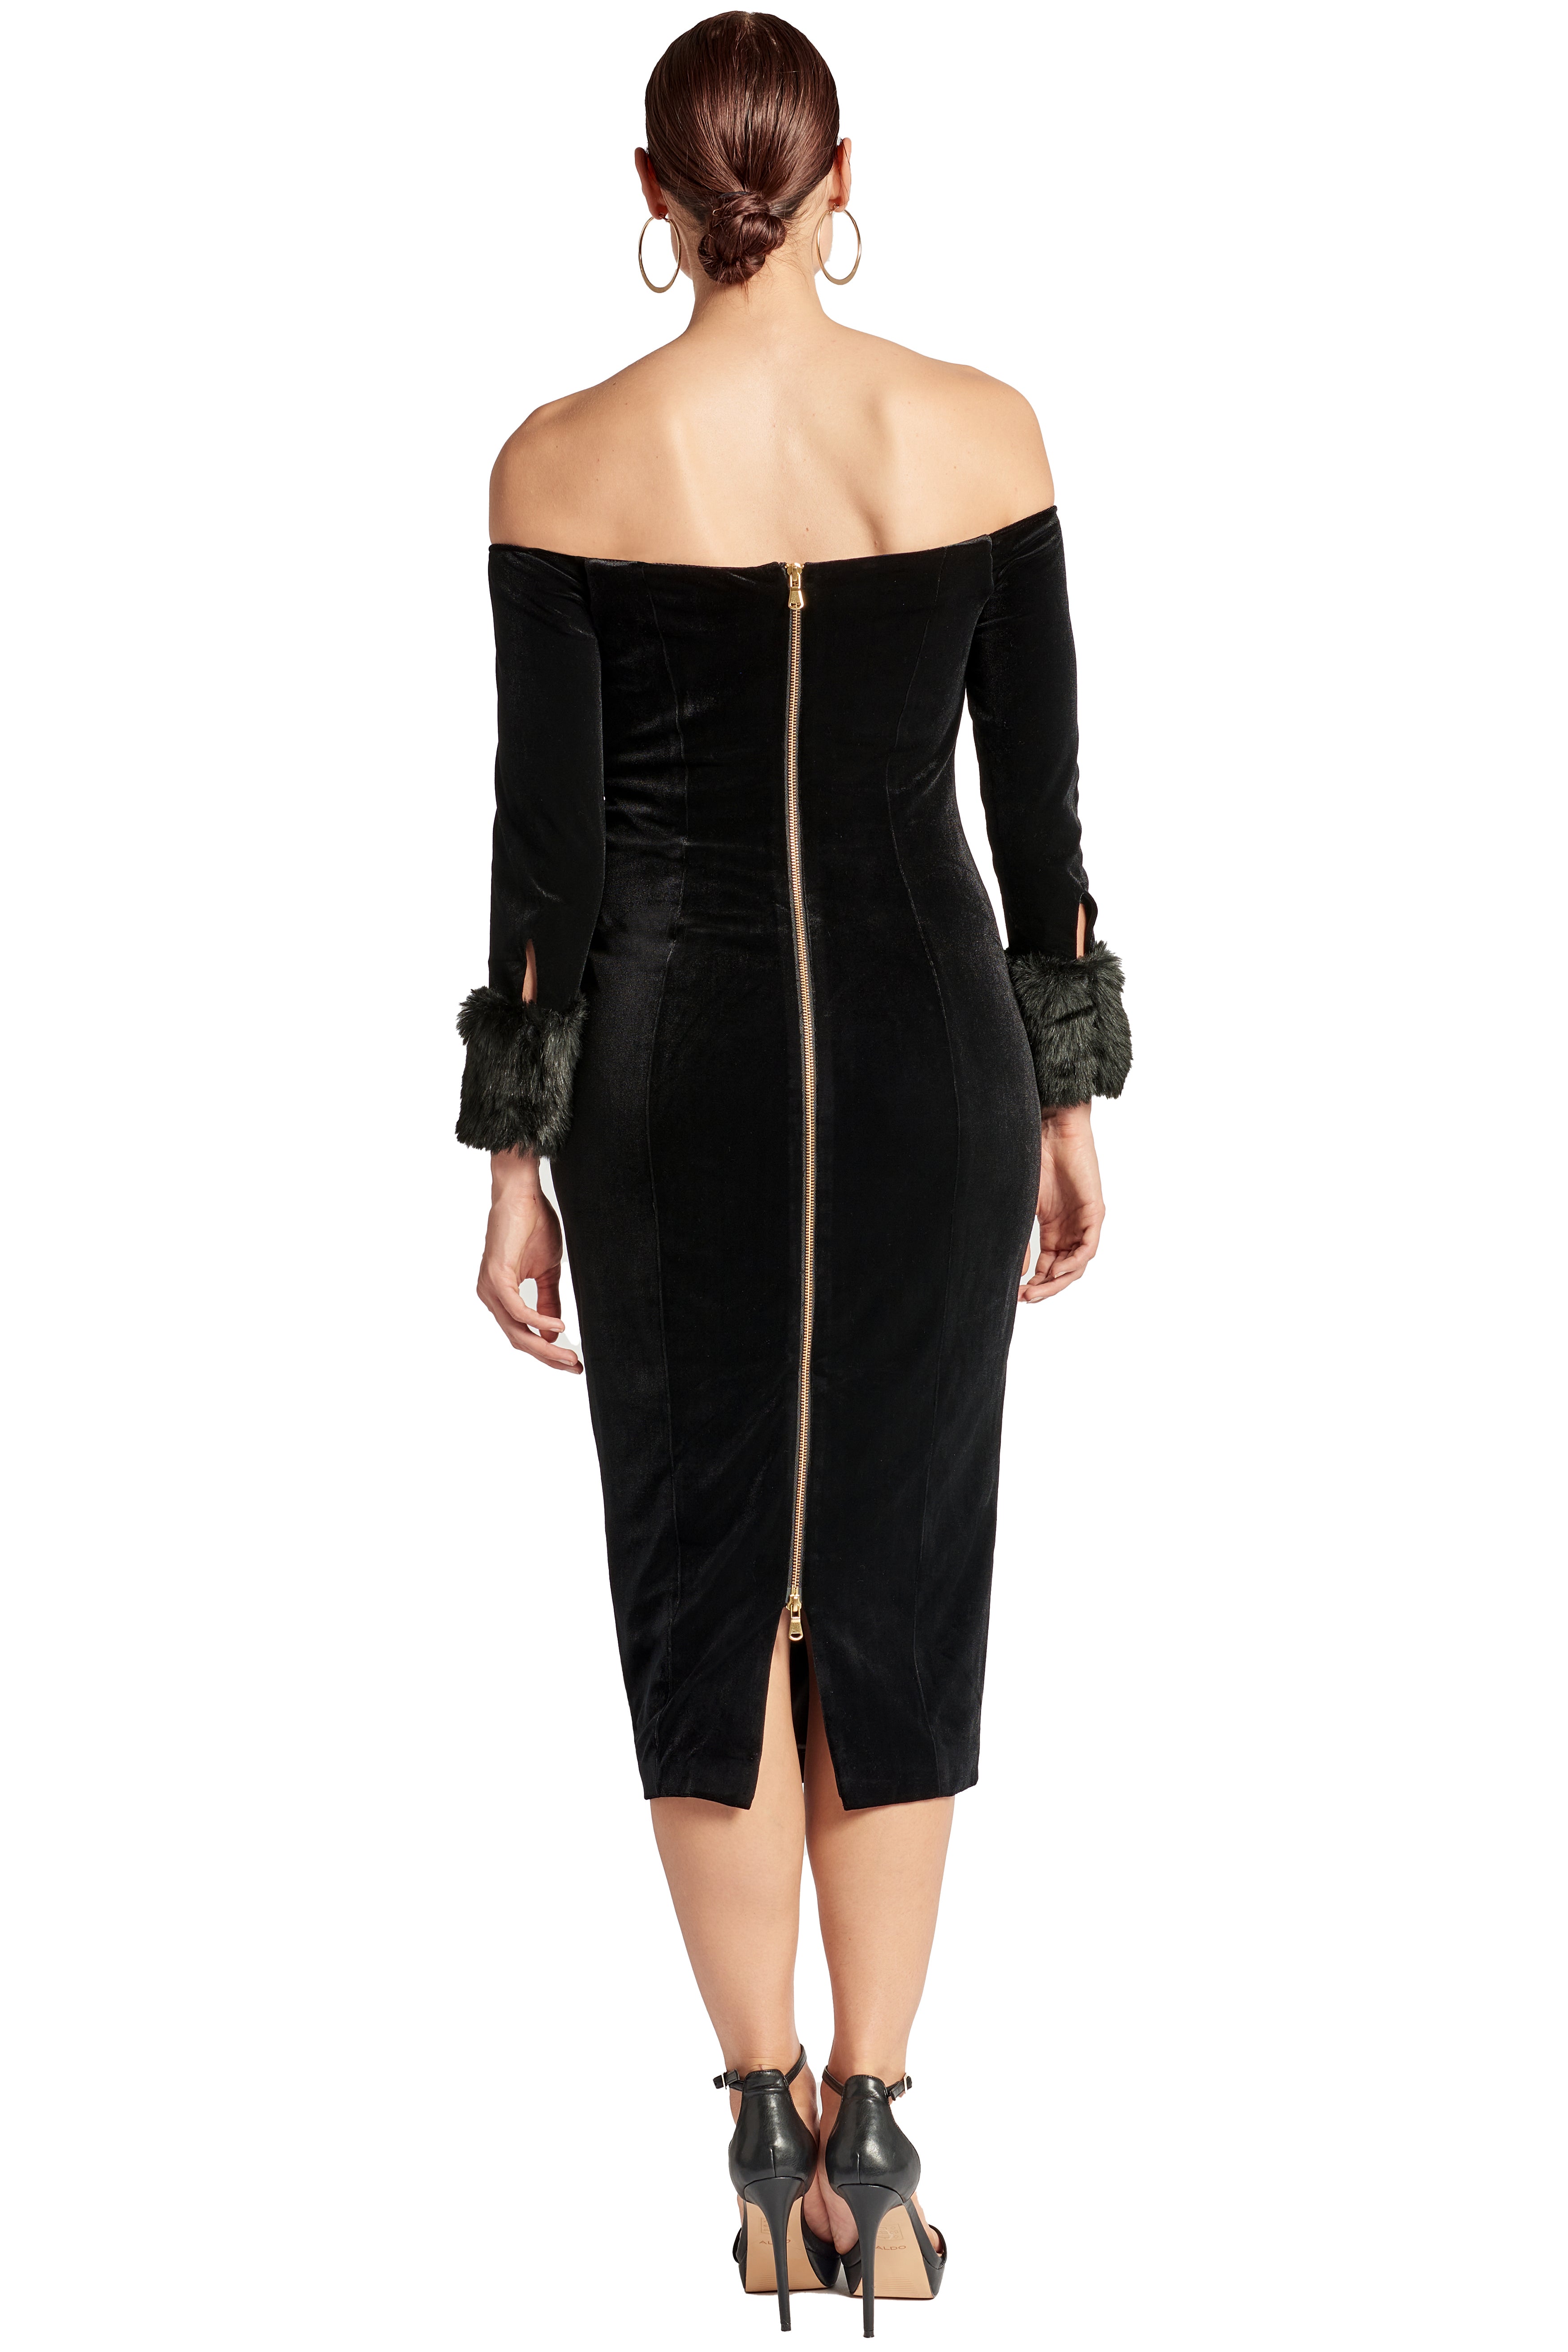 Back view of model wearing the Simona Maghen Joia Dress, off the shoulder black velvet fitted midi dress with long sleeves and faux fur cuffs, with an exposed gold zipper down the center back.